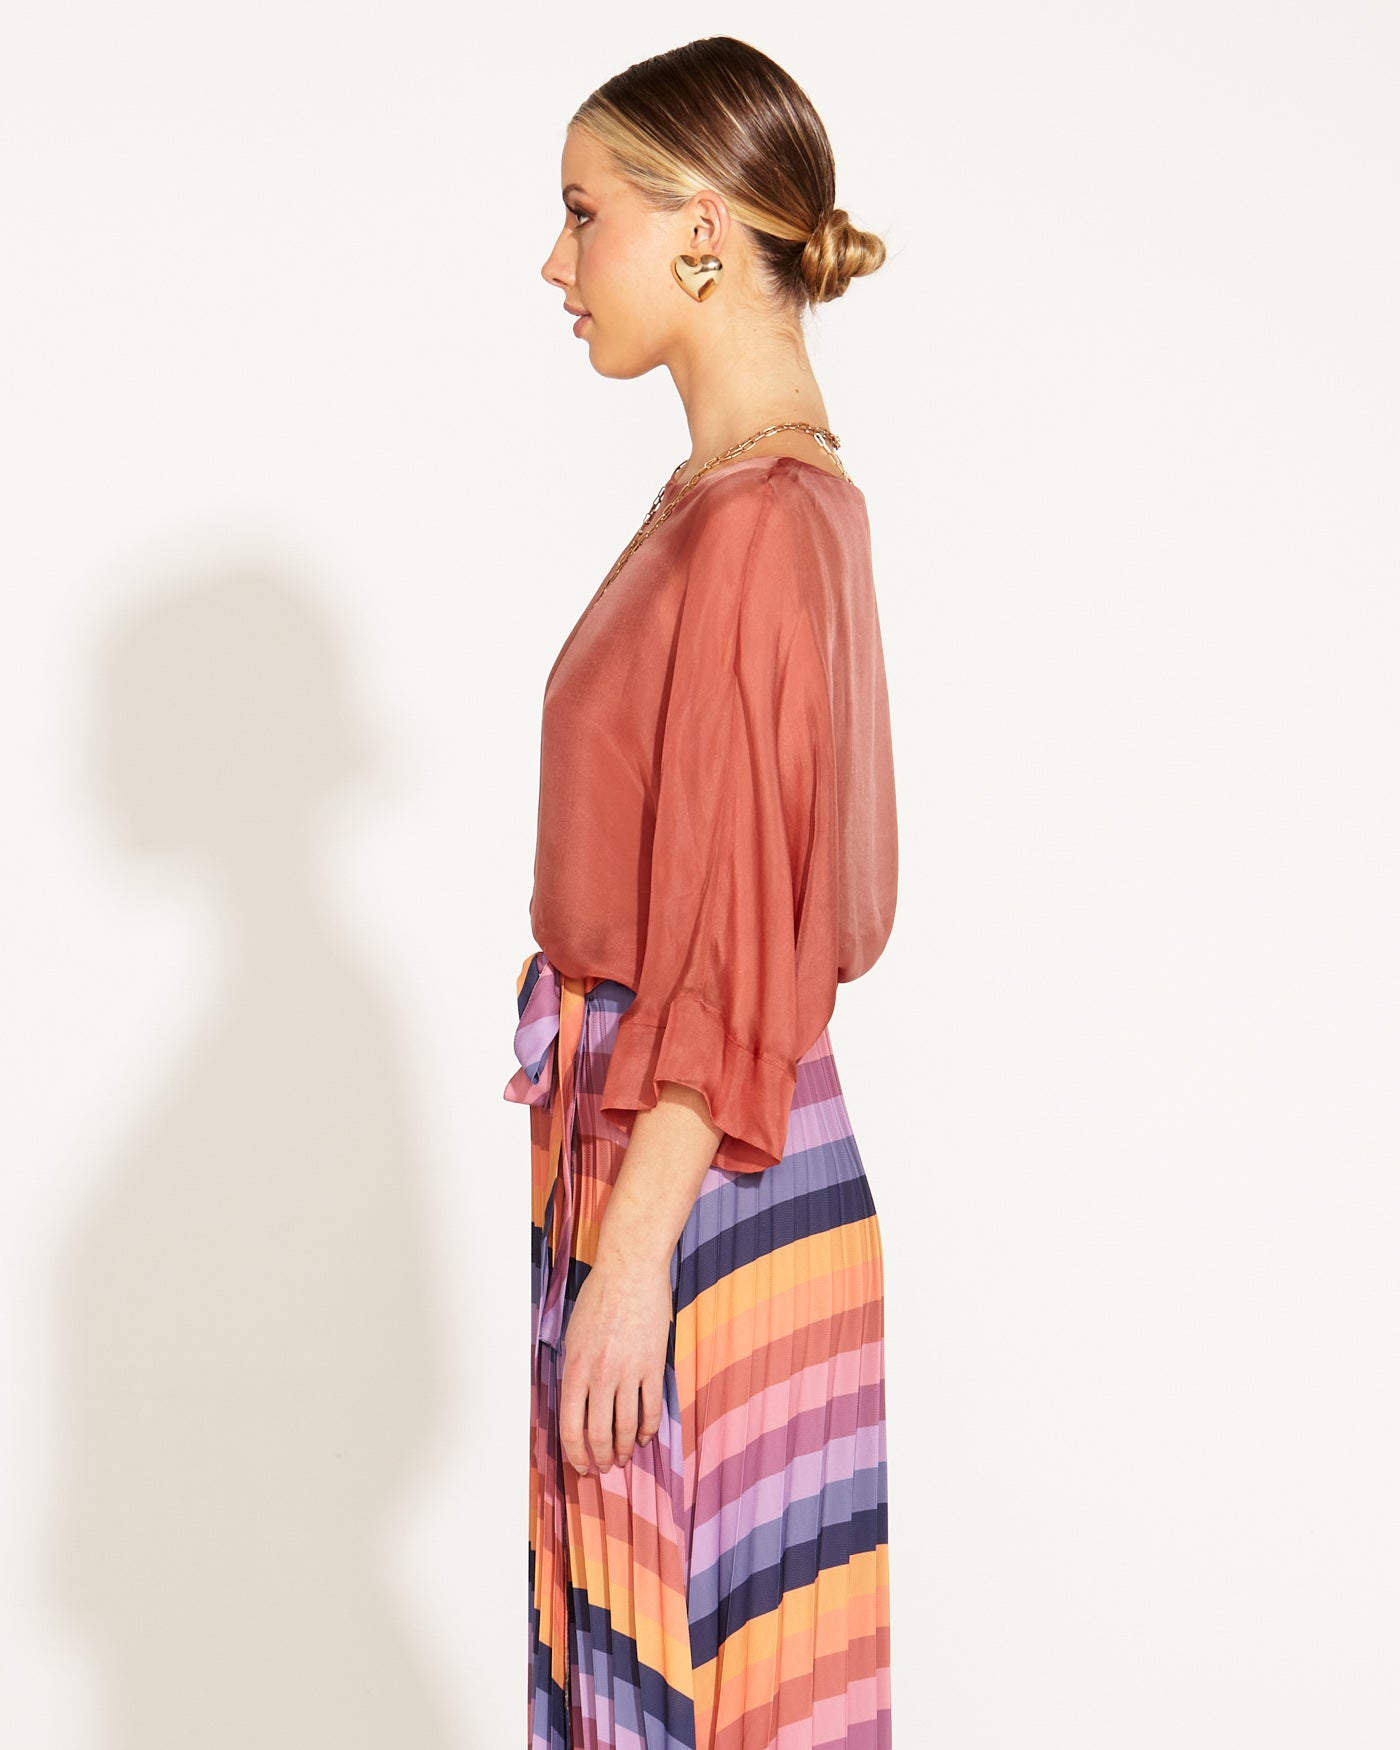 Fate+Becker Sunlight And Shadow Batwing Relaxed Silk Top - Burnt Rose